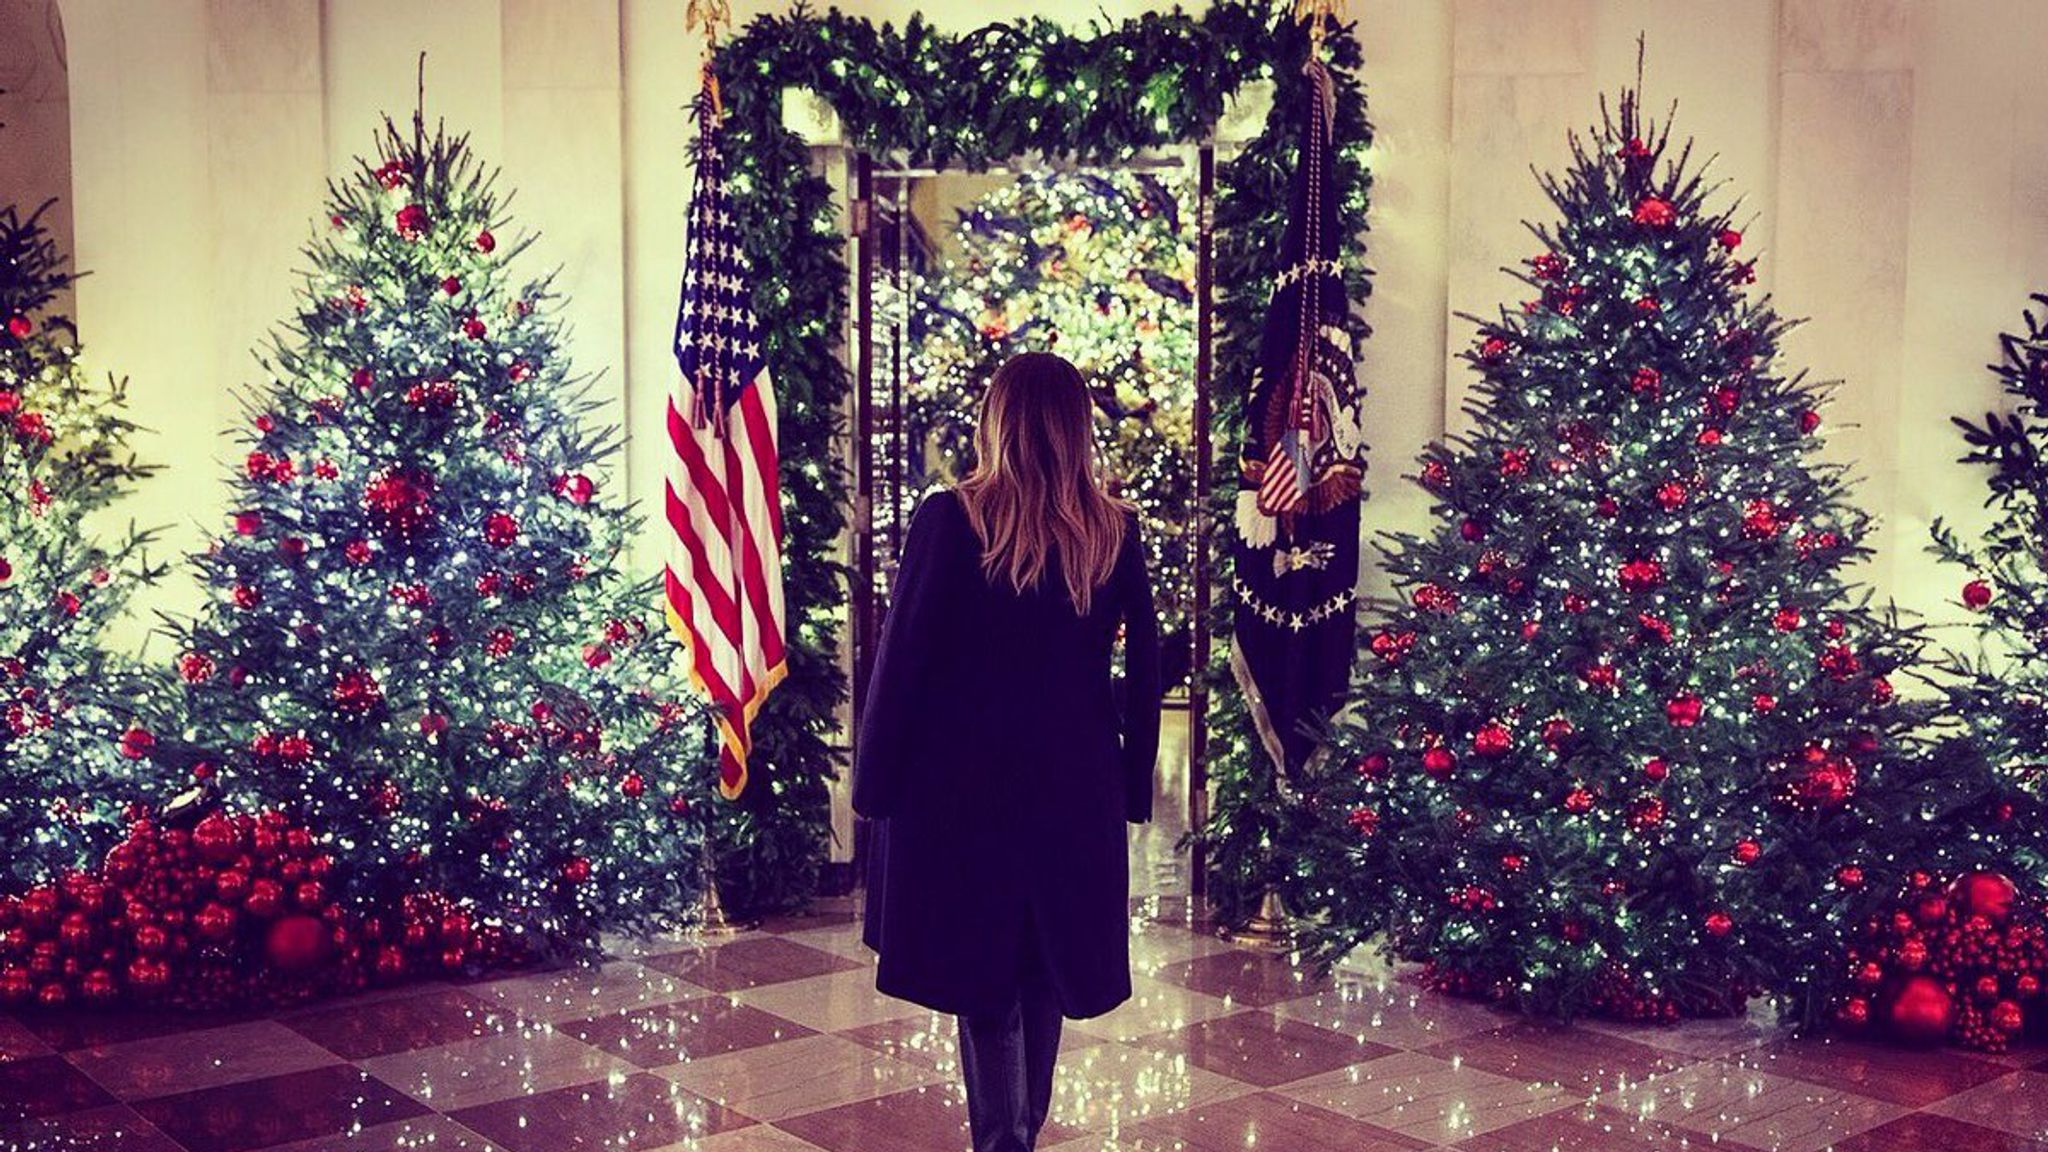 Melania Trump defends 'fantastic' red Christmas trees at White House